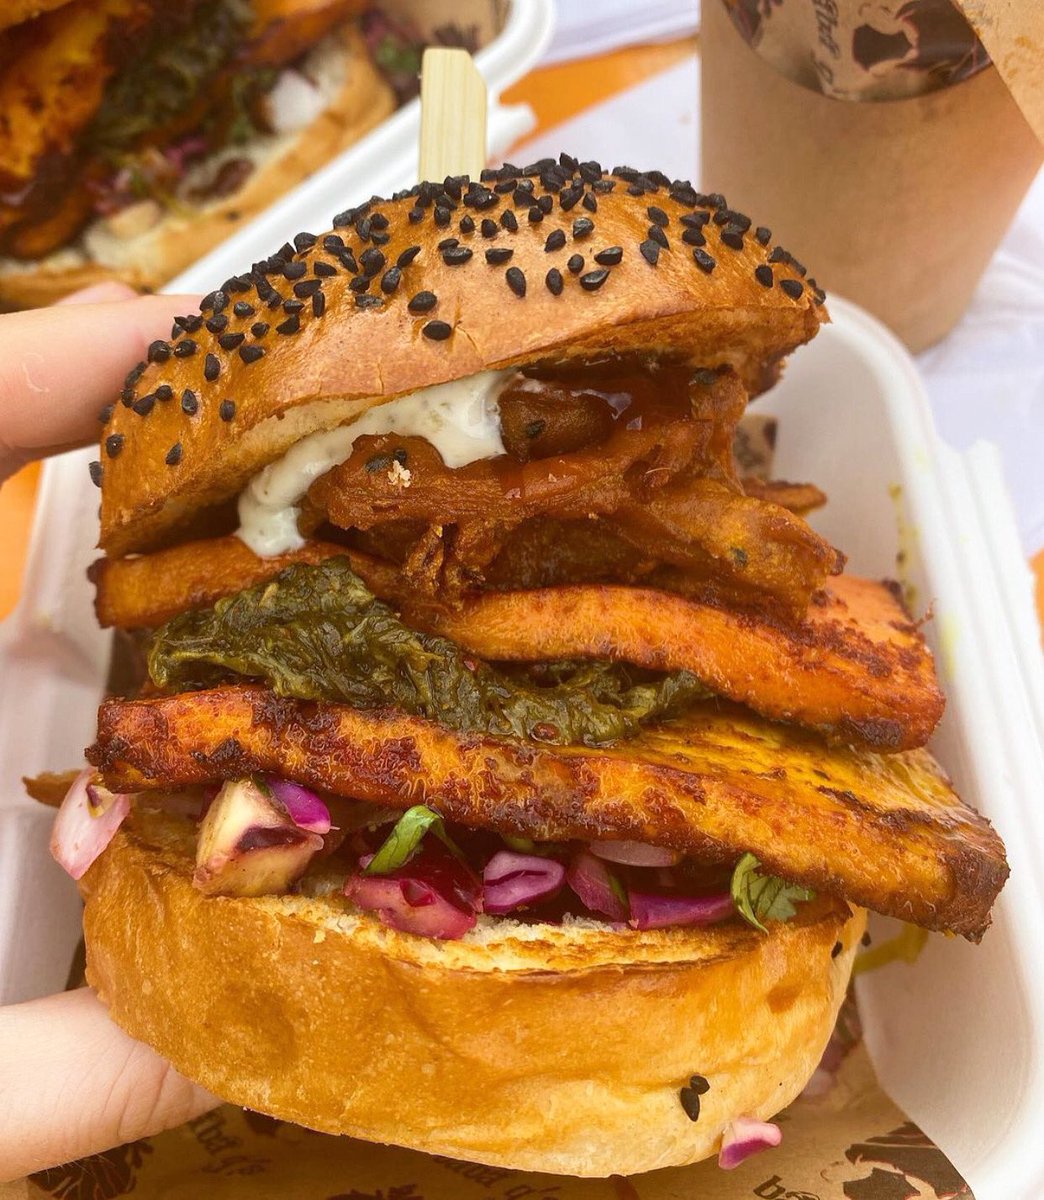 #MeatFreeMonday looking pretty damn good from where we’re sitting 😎 Come try our Saag Paneer burger - filled with mint, coriander, mehti saag, spicy paneer wedges, tamarind sauce and an onion bhaji.